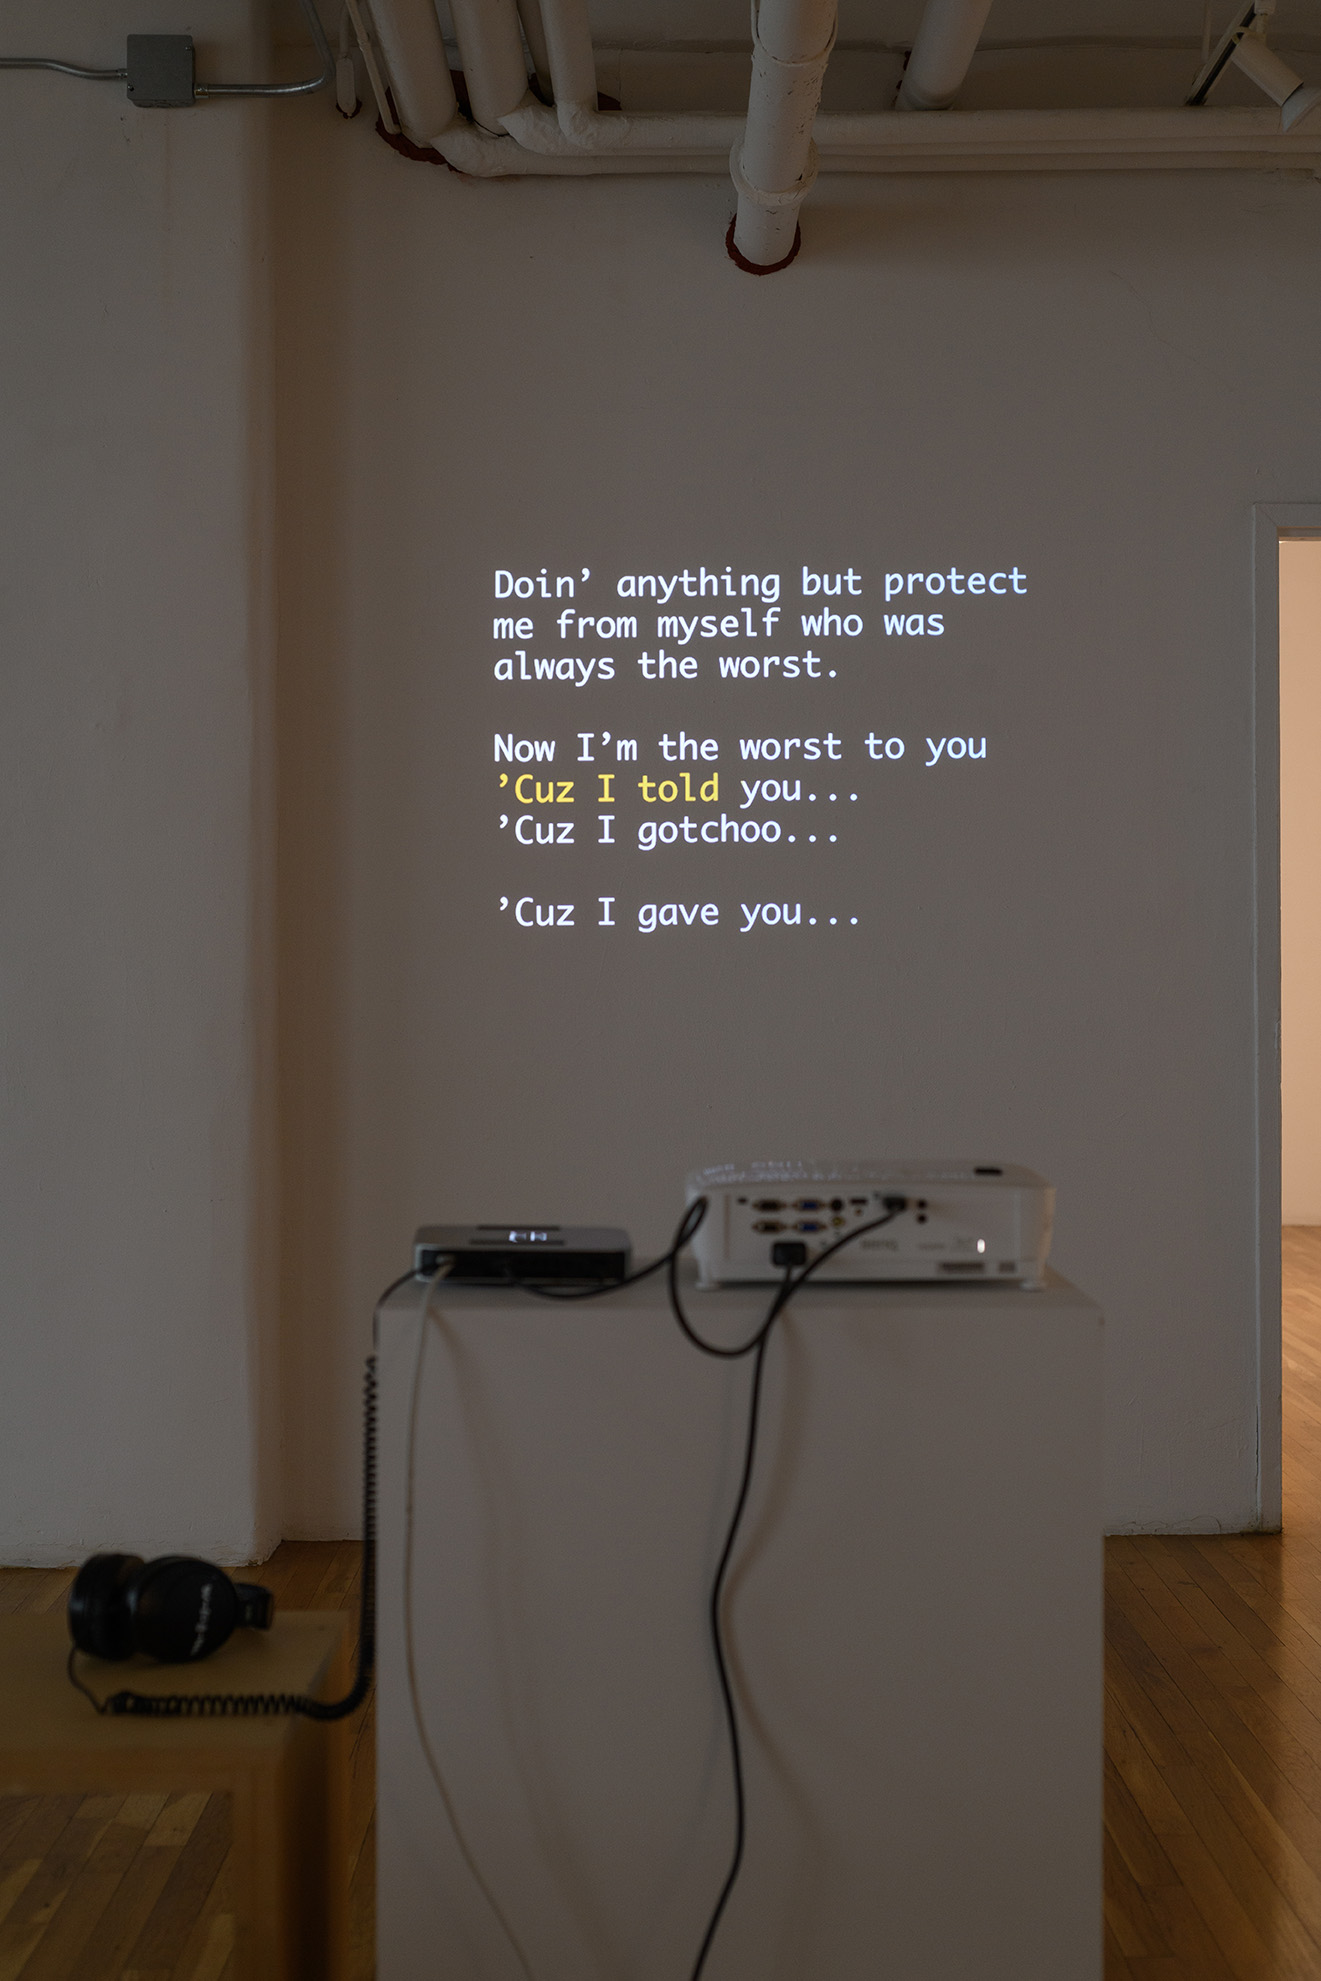 [Another view of the same projection at a different point in the video showing both the projected image and the projector machine, media player, and cabling–all sitting on a white plinth. The projected image shows song lyrics in white text with a portion highlighted in yellow, as is true of karaoke videos. It reads, quote: “Now I’m the worst to you / ‘Cuz I told you… / ‘Cuz I gotchoo… / … / ‘Cuz I gave you… ]